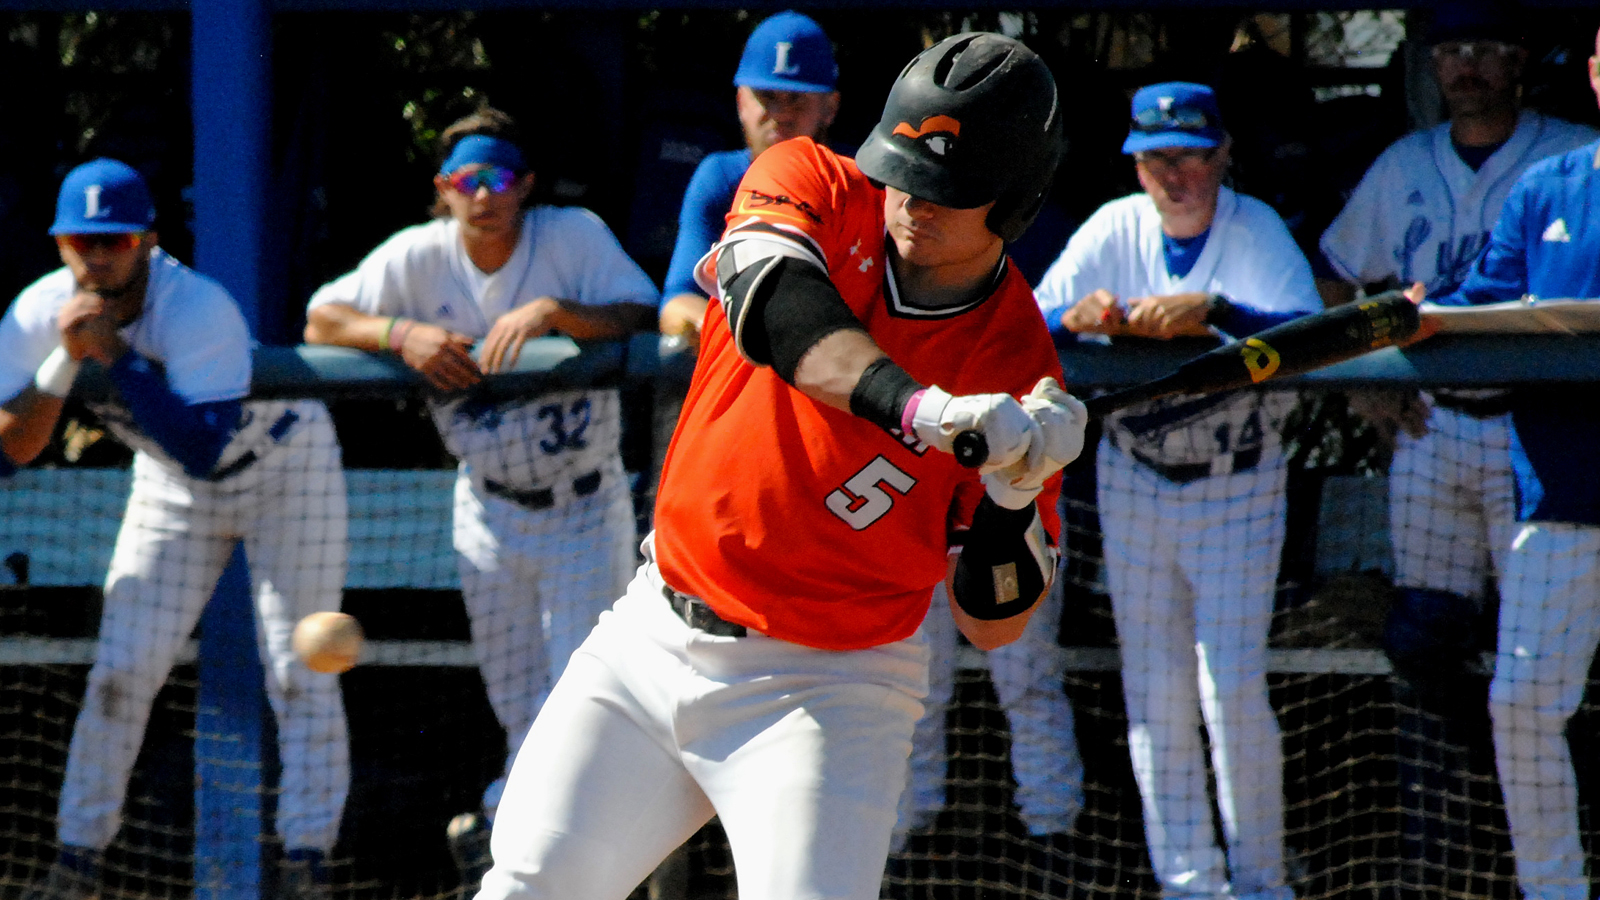 Pioneers end Florida trip with 11-5 loss at Embry-Riddle, Martin breaks walks record